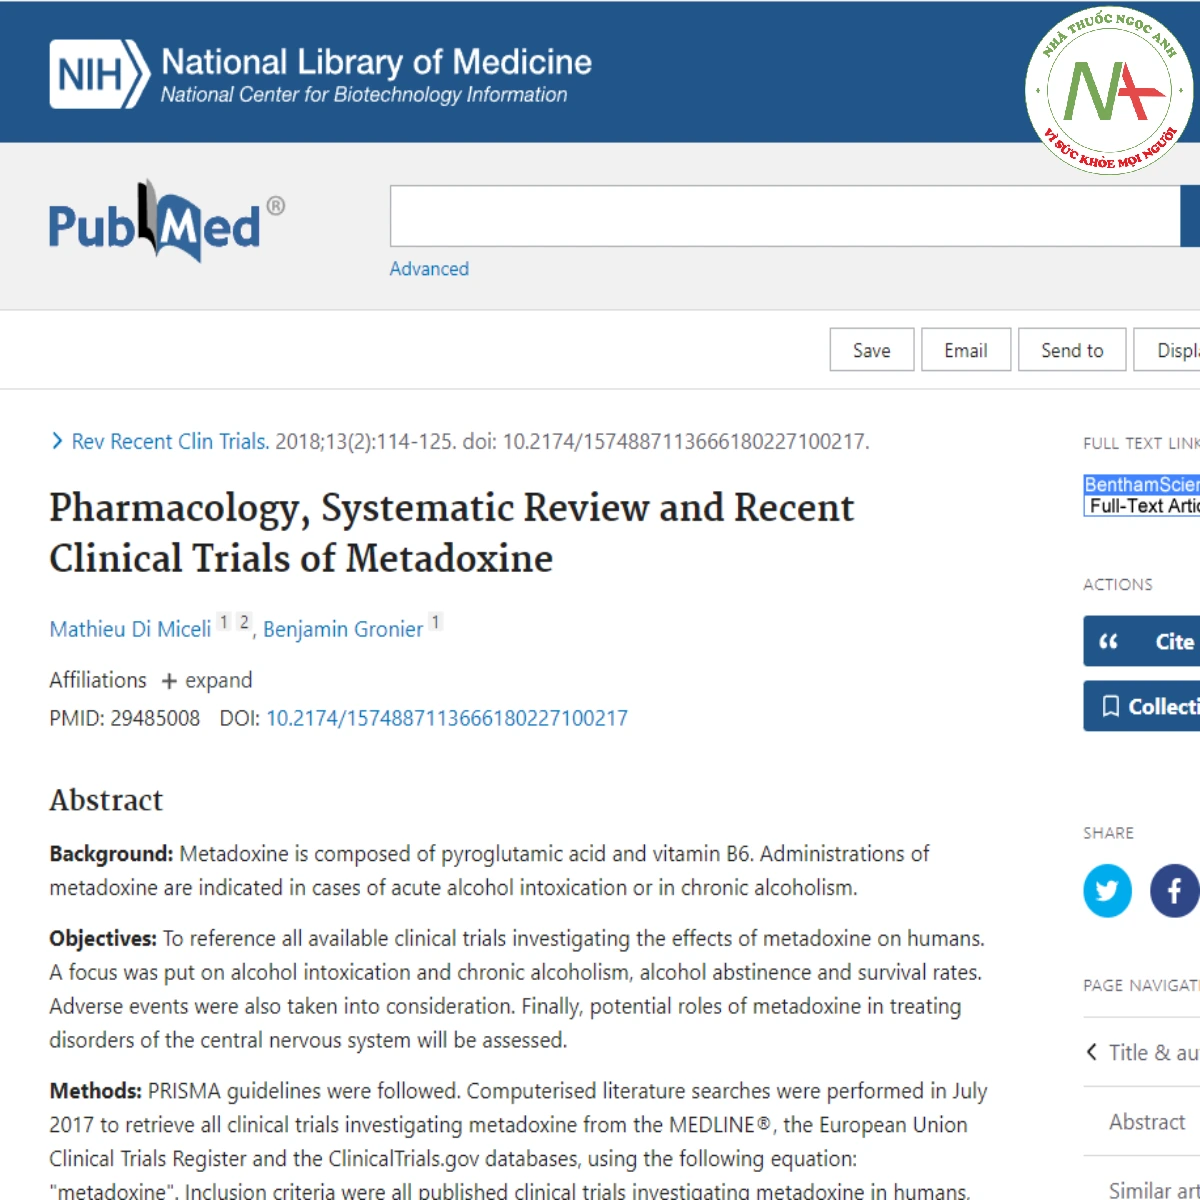 Pharmacology, Systematic Review and Recent Clinical Trials of Metadoxine